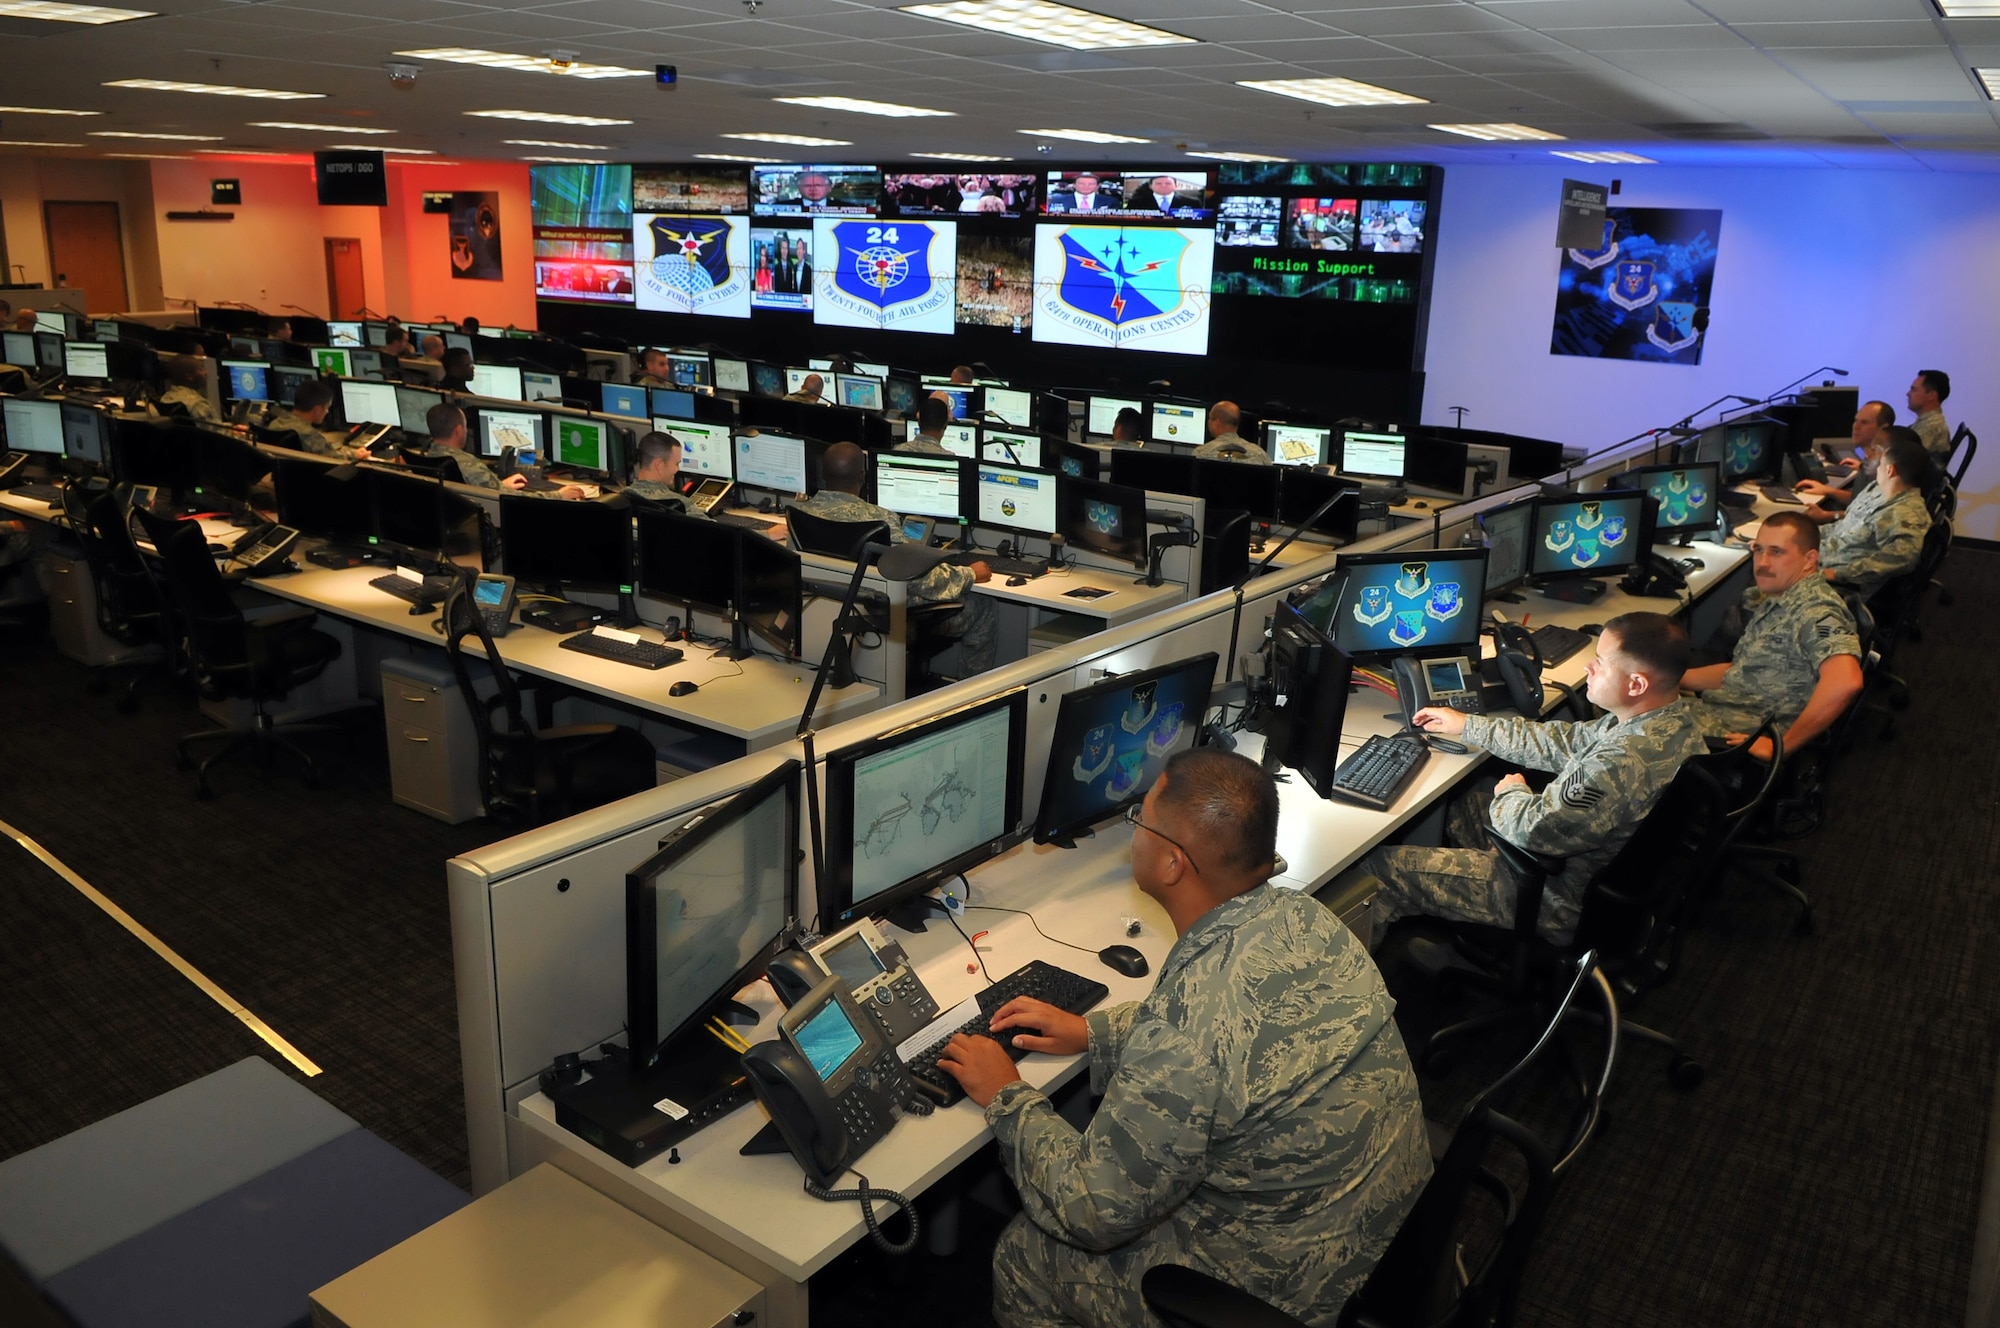 Personnel of the 624th Operations Center, located at Joint Base San
Antonio - Lackland, conduct cyber operations in support of the command and
control of Air Force network operations and the joint requirements of Air
Forces Cyber, the Air Force component of U.S. Cyber Command. The 624th OC is
the operational arm of the 24th Air Force, and benefits from lessons learned
during exercises such as Cyber Flag 13-1. (U.S. Air Force photo by William
Belcher)
